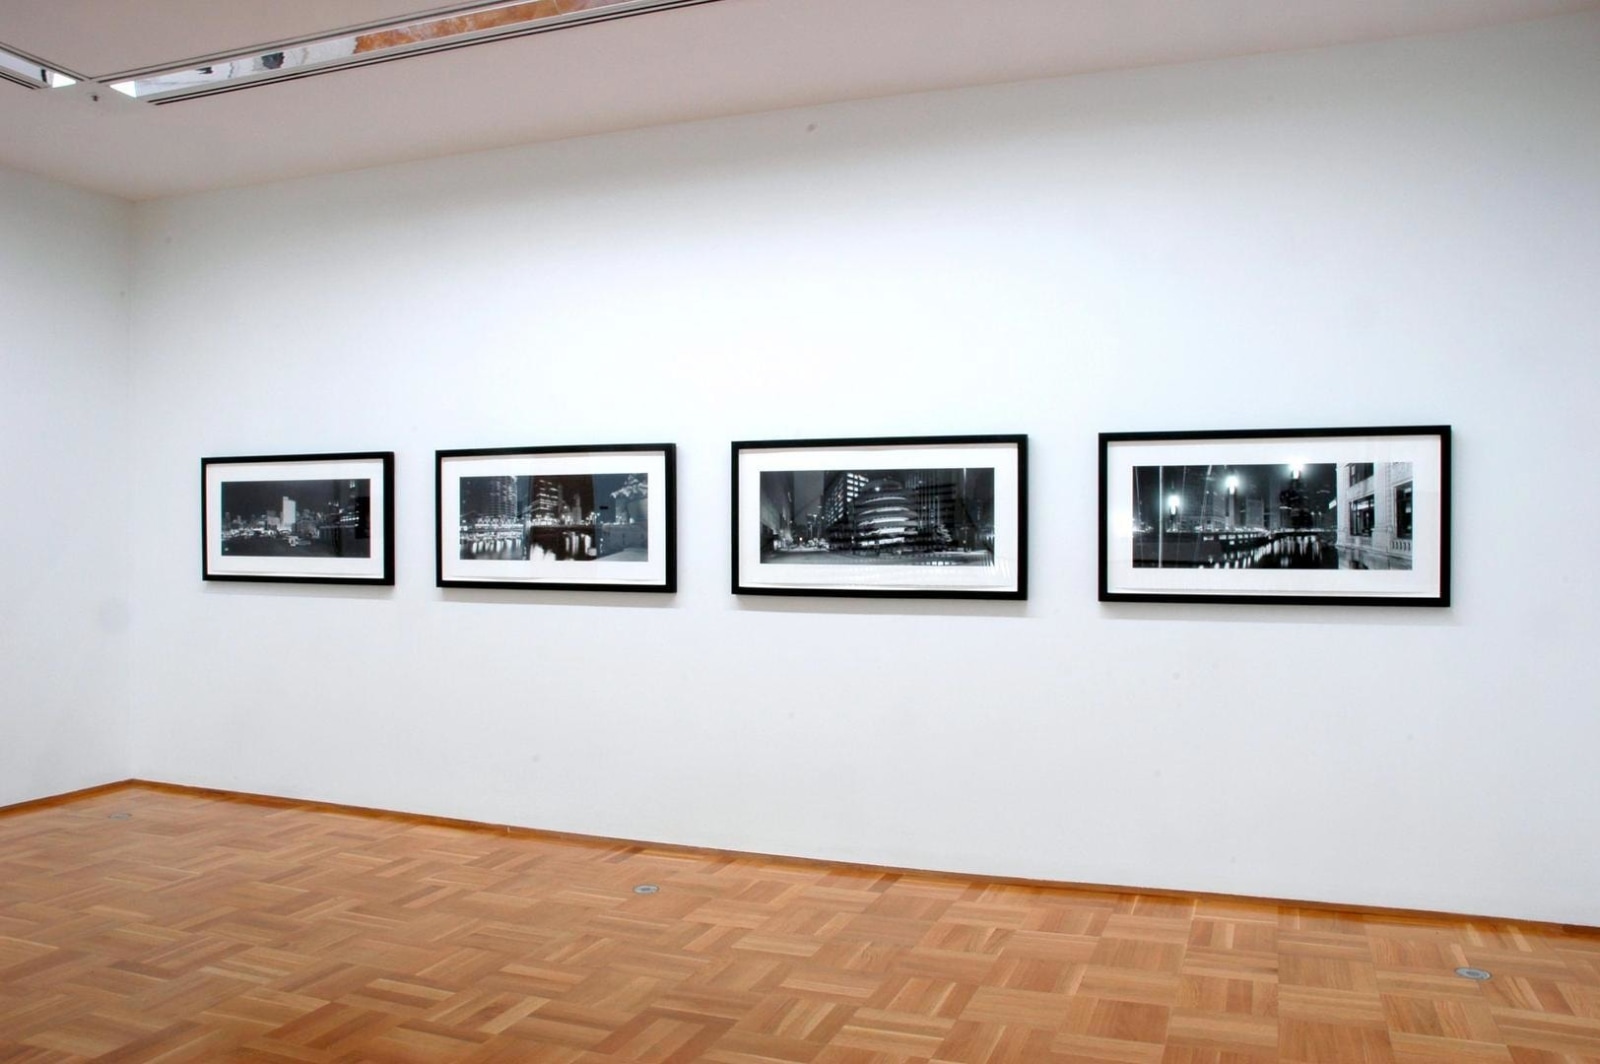  Installation view of Catherine Opie:&nbsp;Chicago (American Cities)&nbsp;at the Museum of Contemporary Art, Chicago